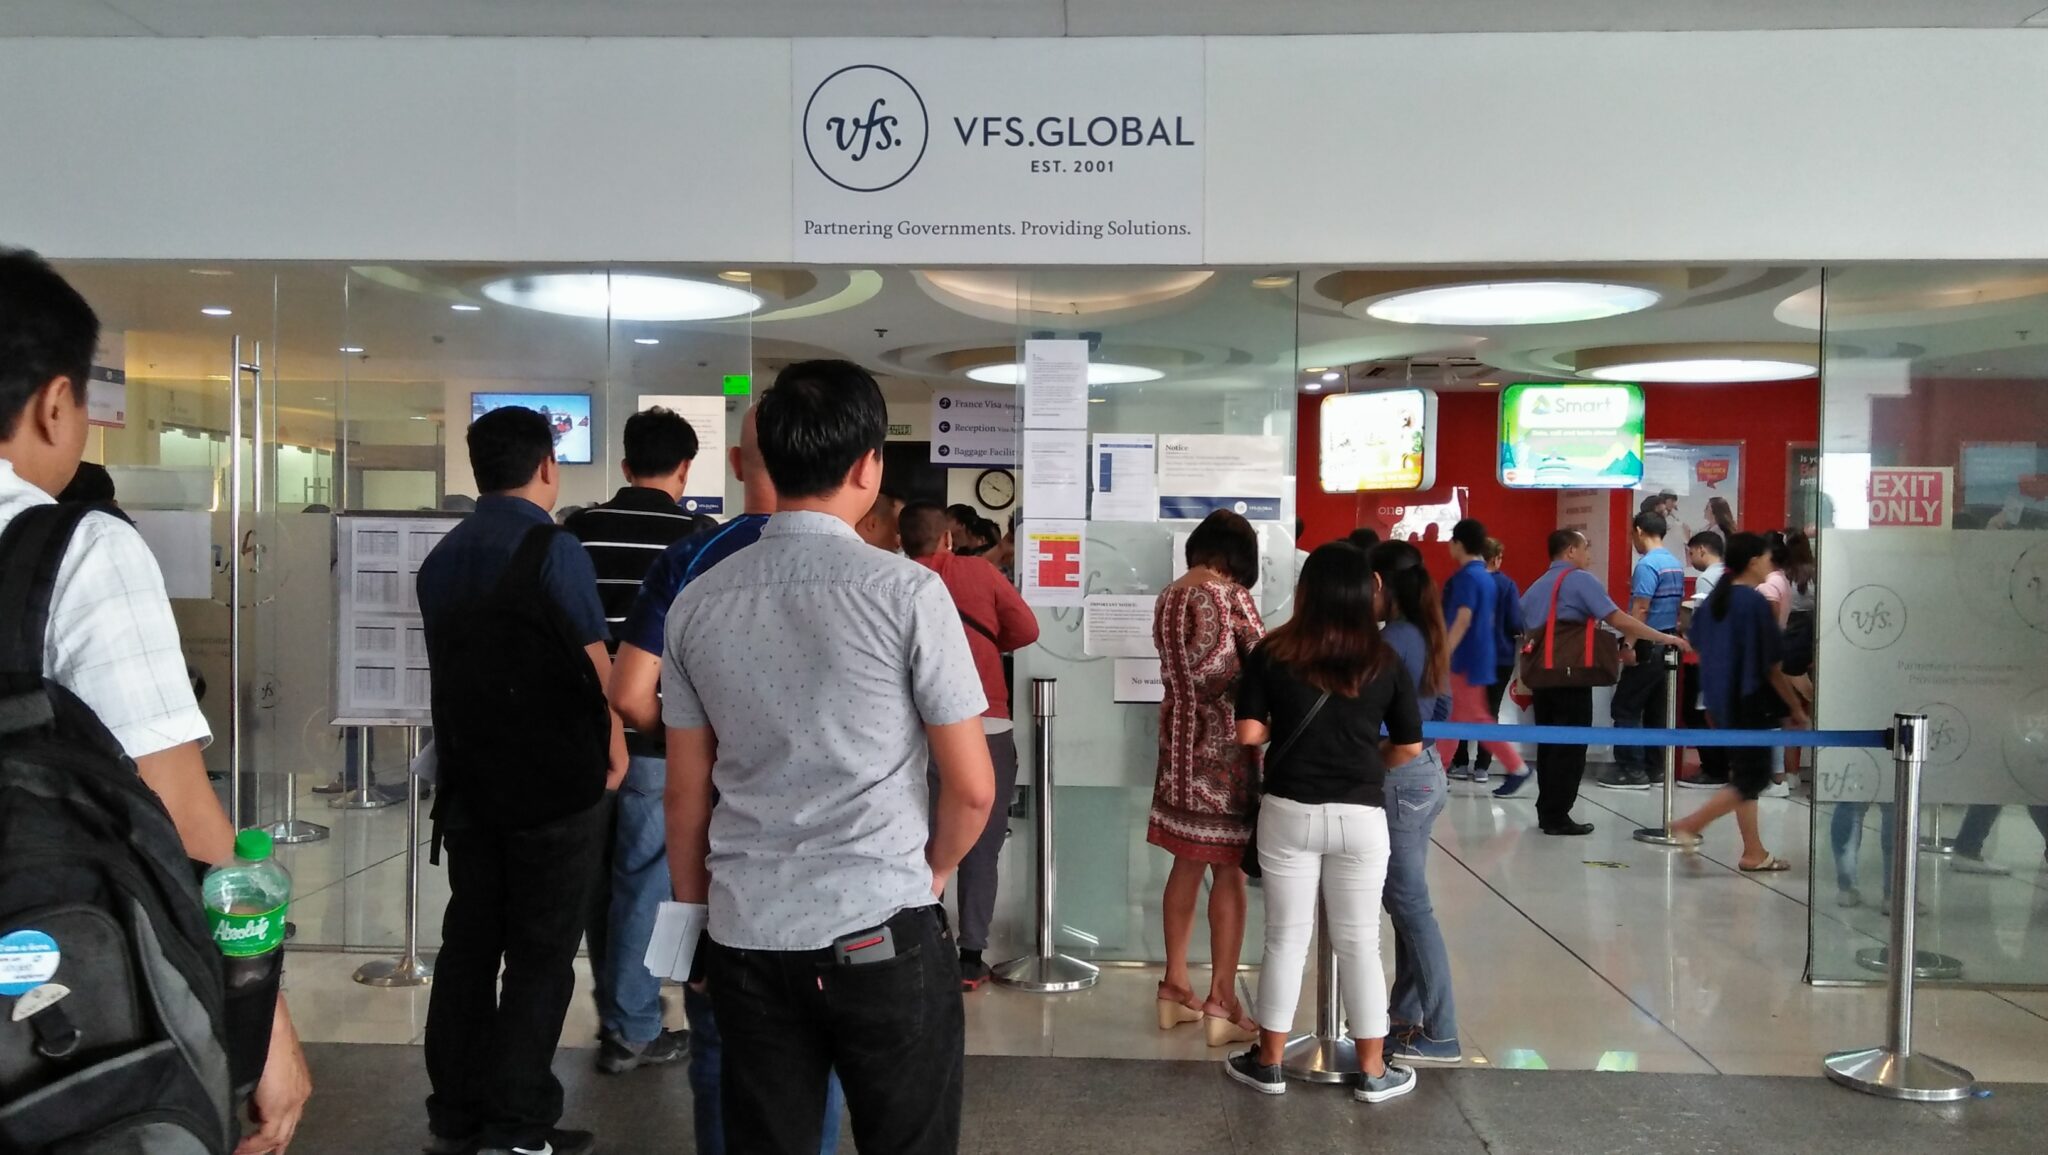 Applicants falling in line near the entrance of VFS Global.